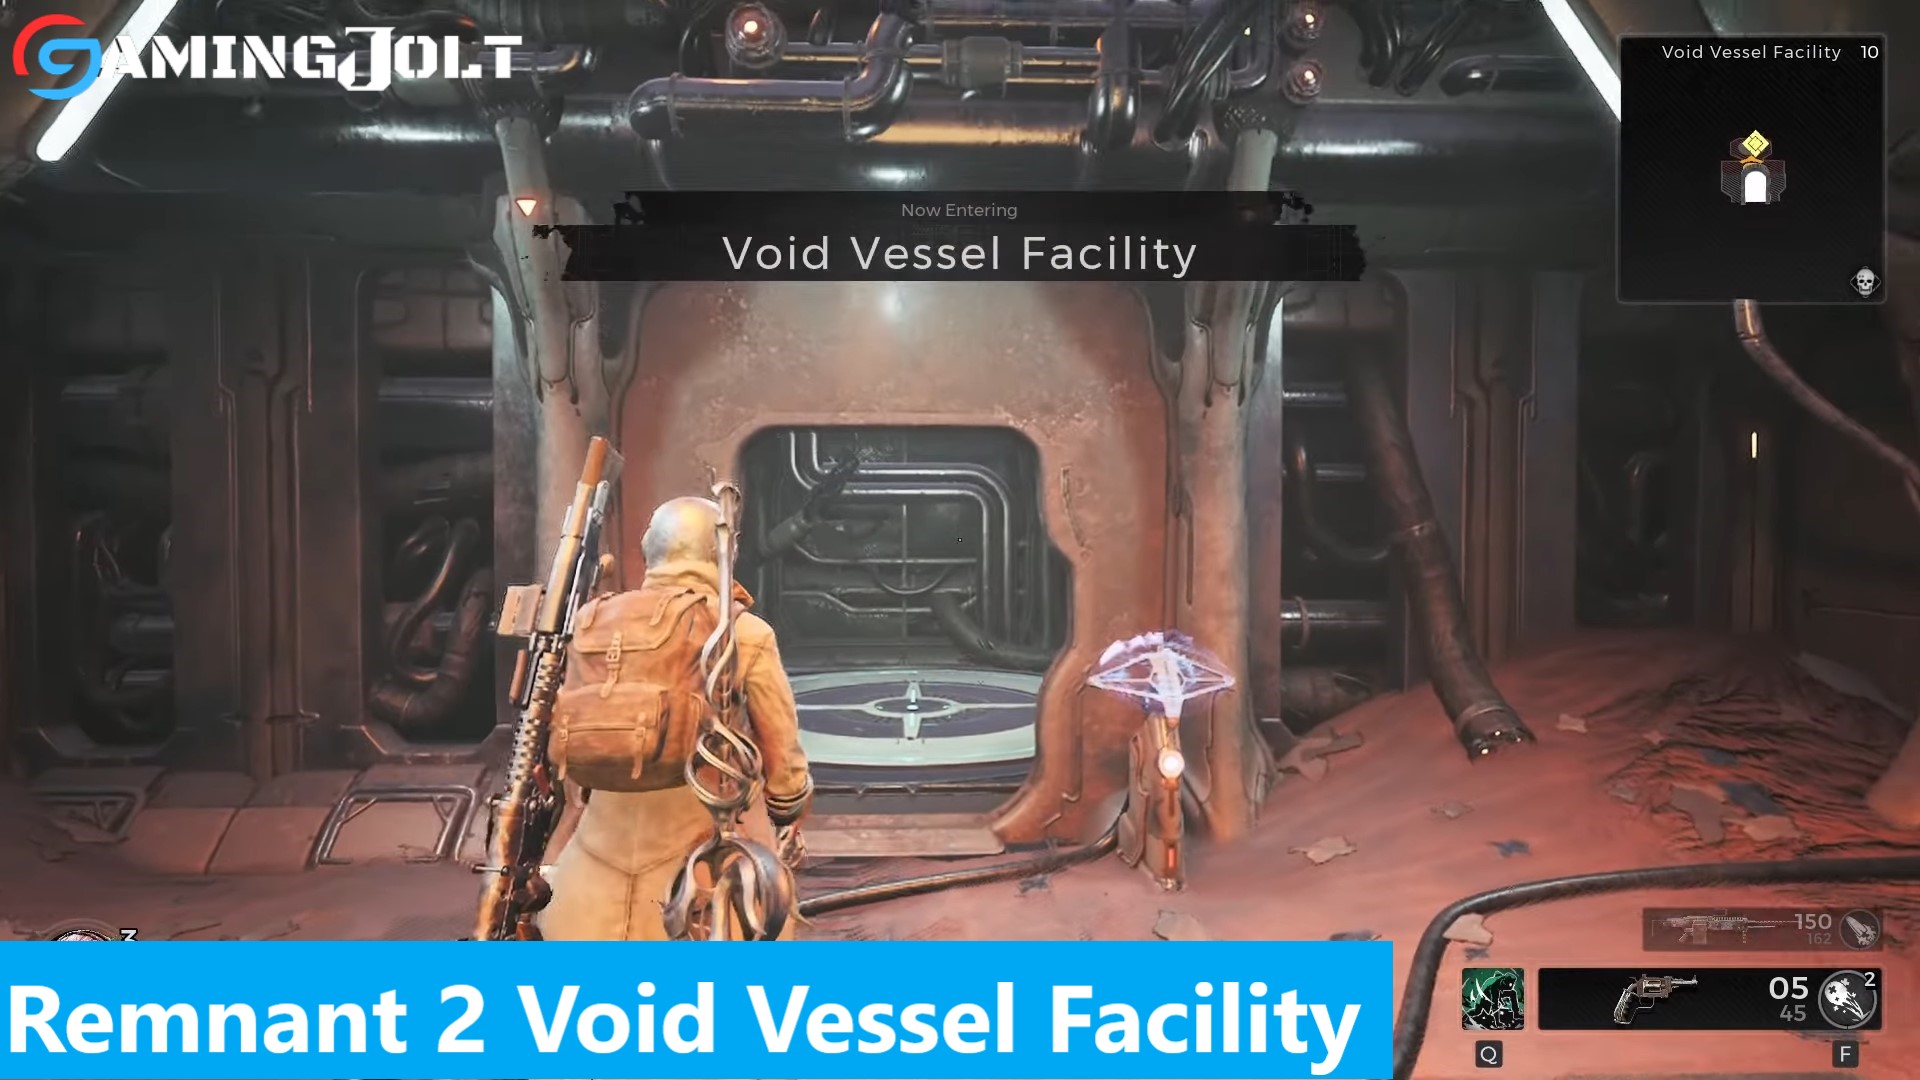 Remnant 2 Void Vessel Facility